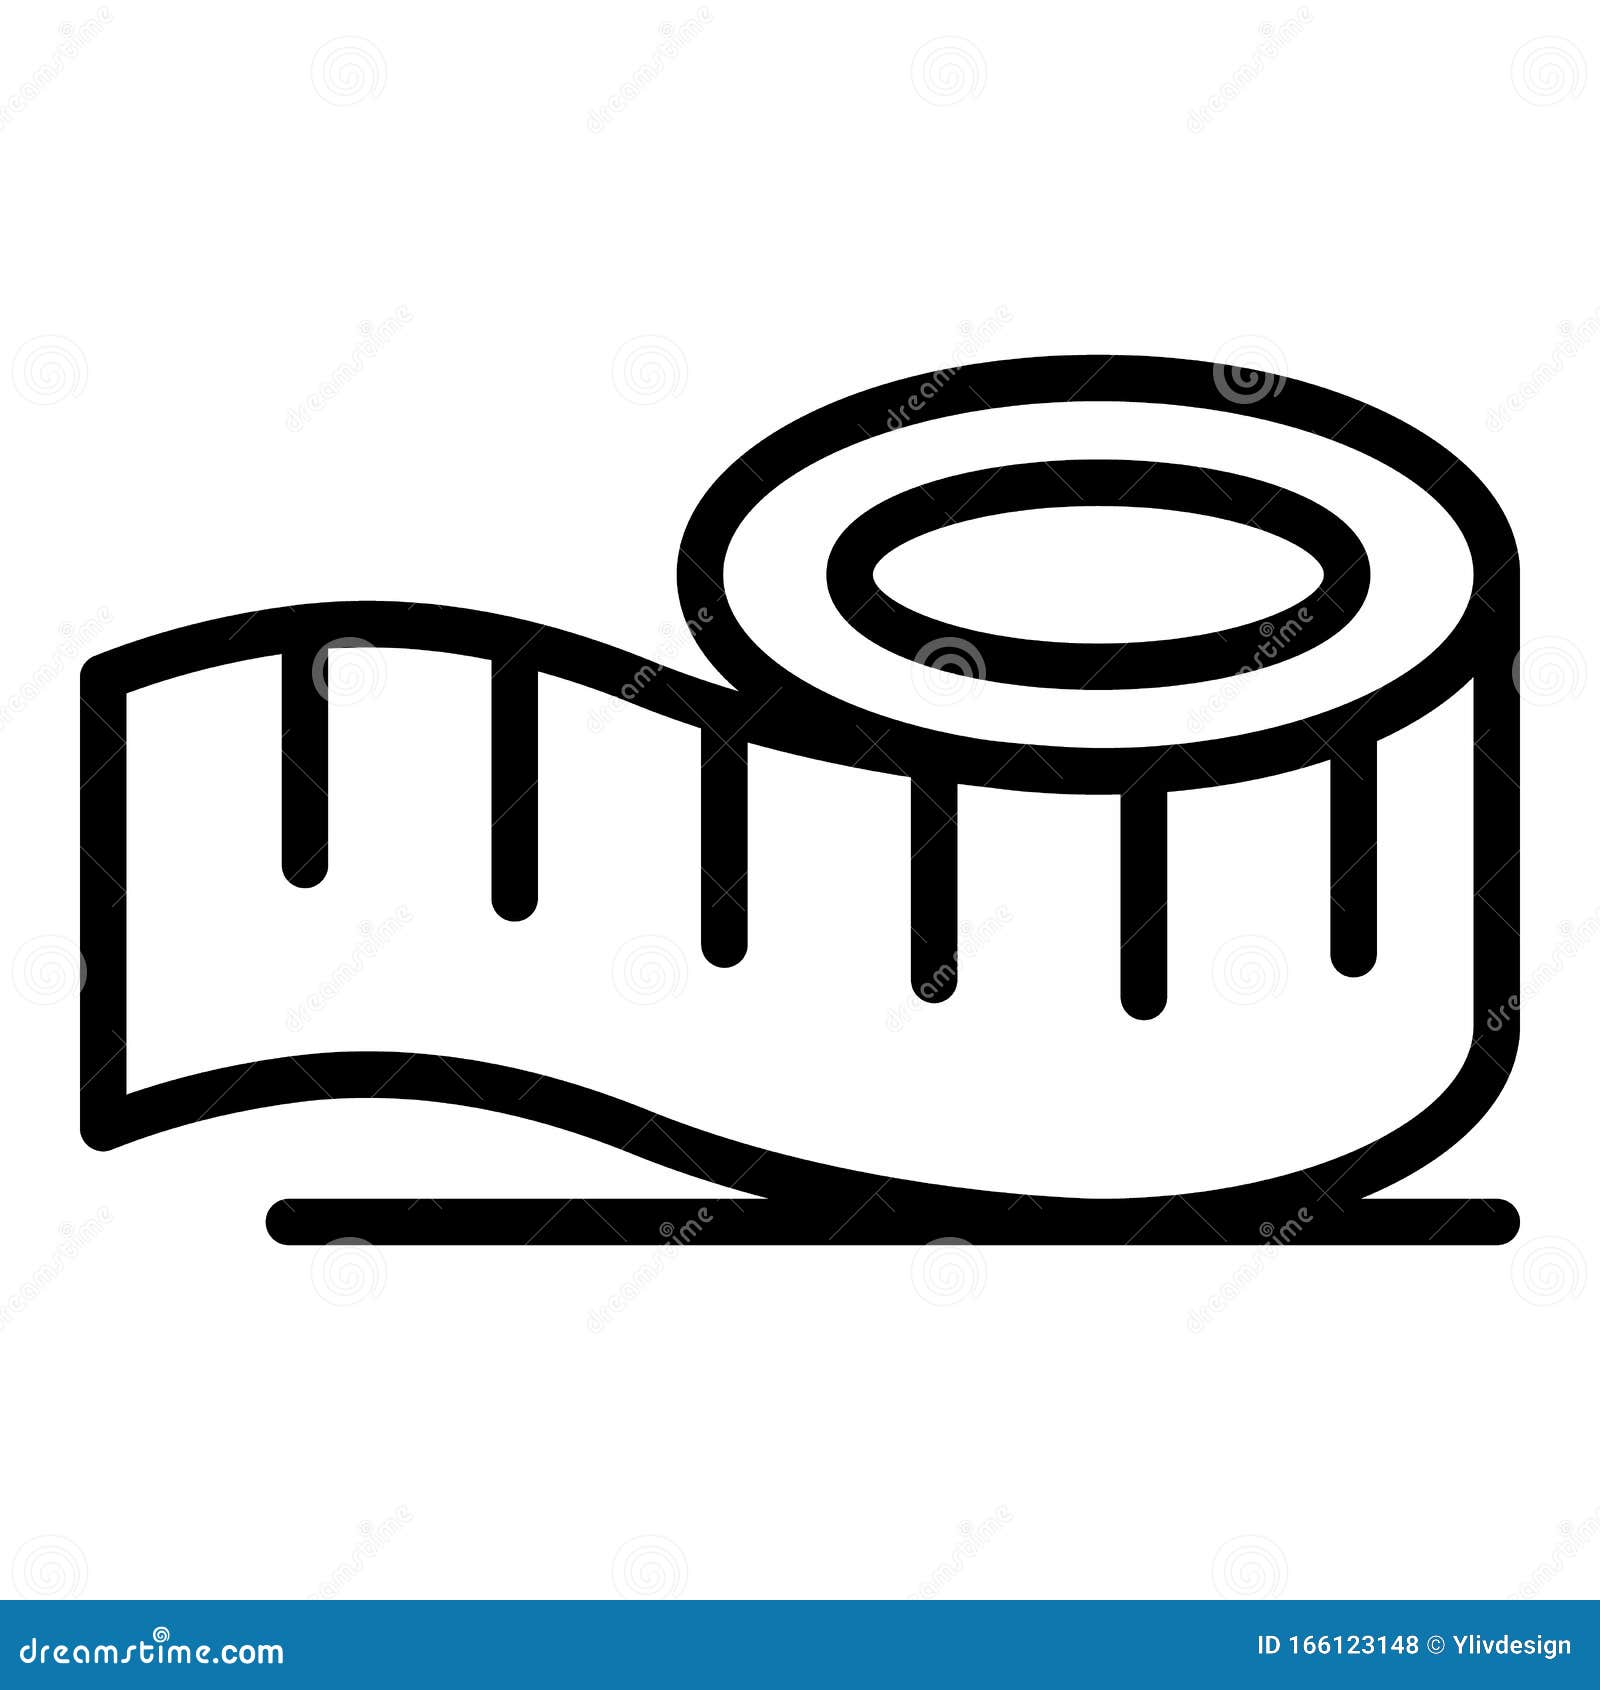 https://thumbs.dreamstime.com/z/measurement-tape-icon-outline-style-vector-web-design-isolated-white-background-166123148.jpg